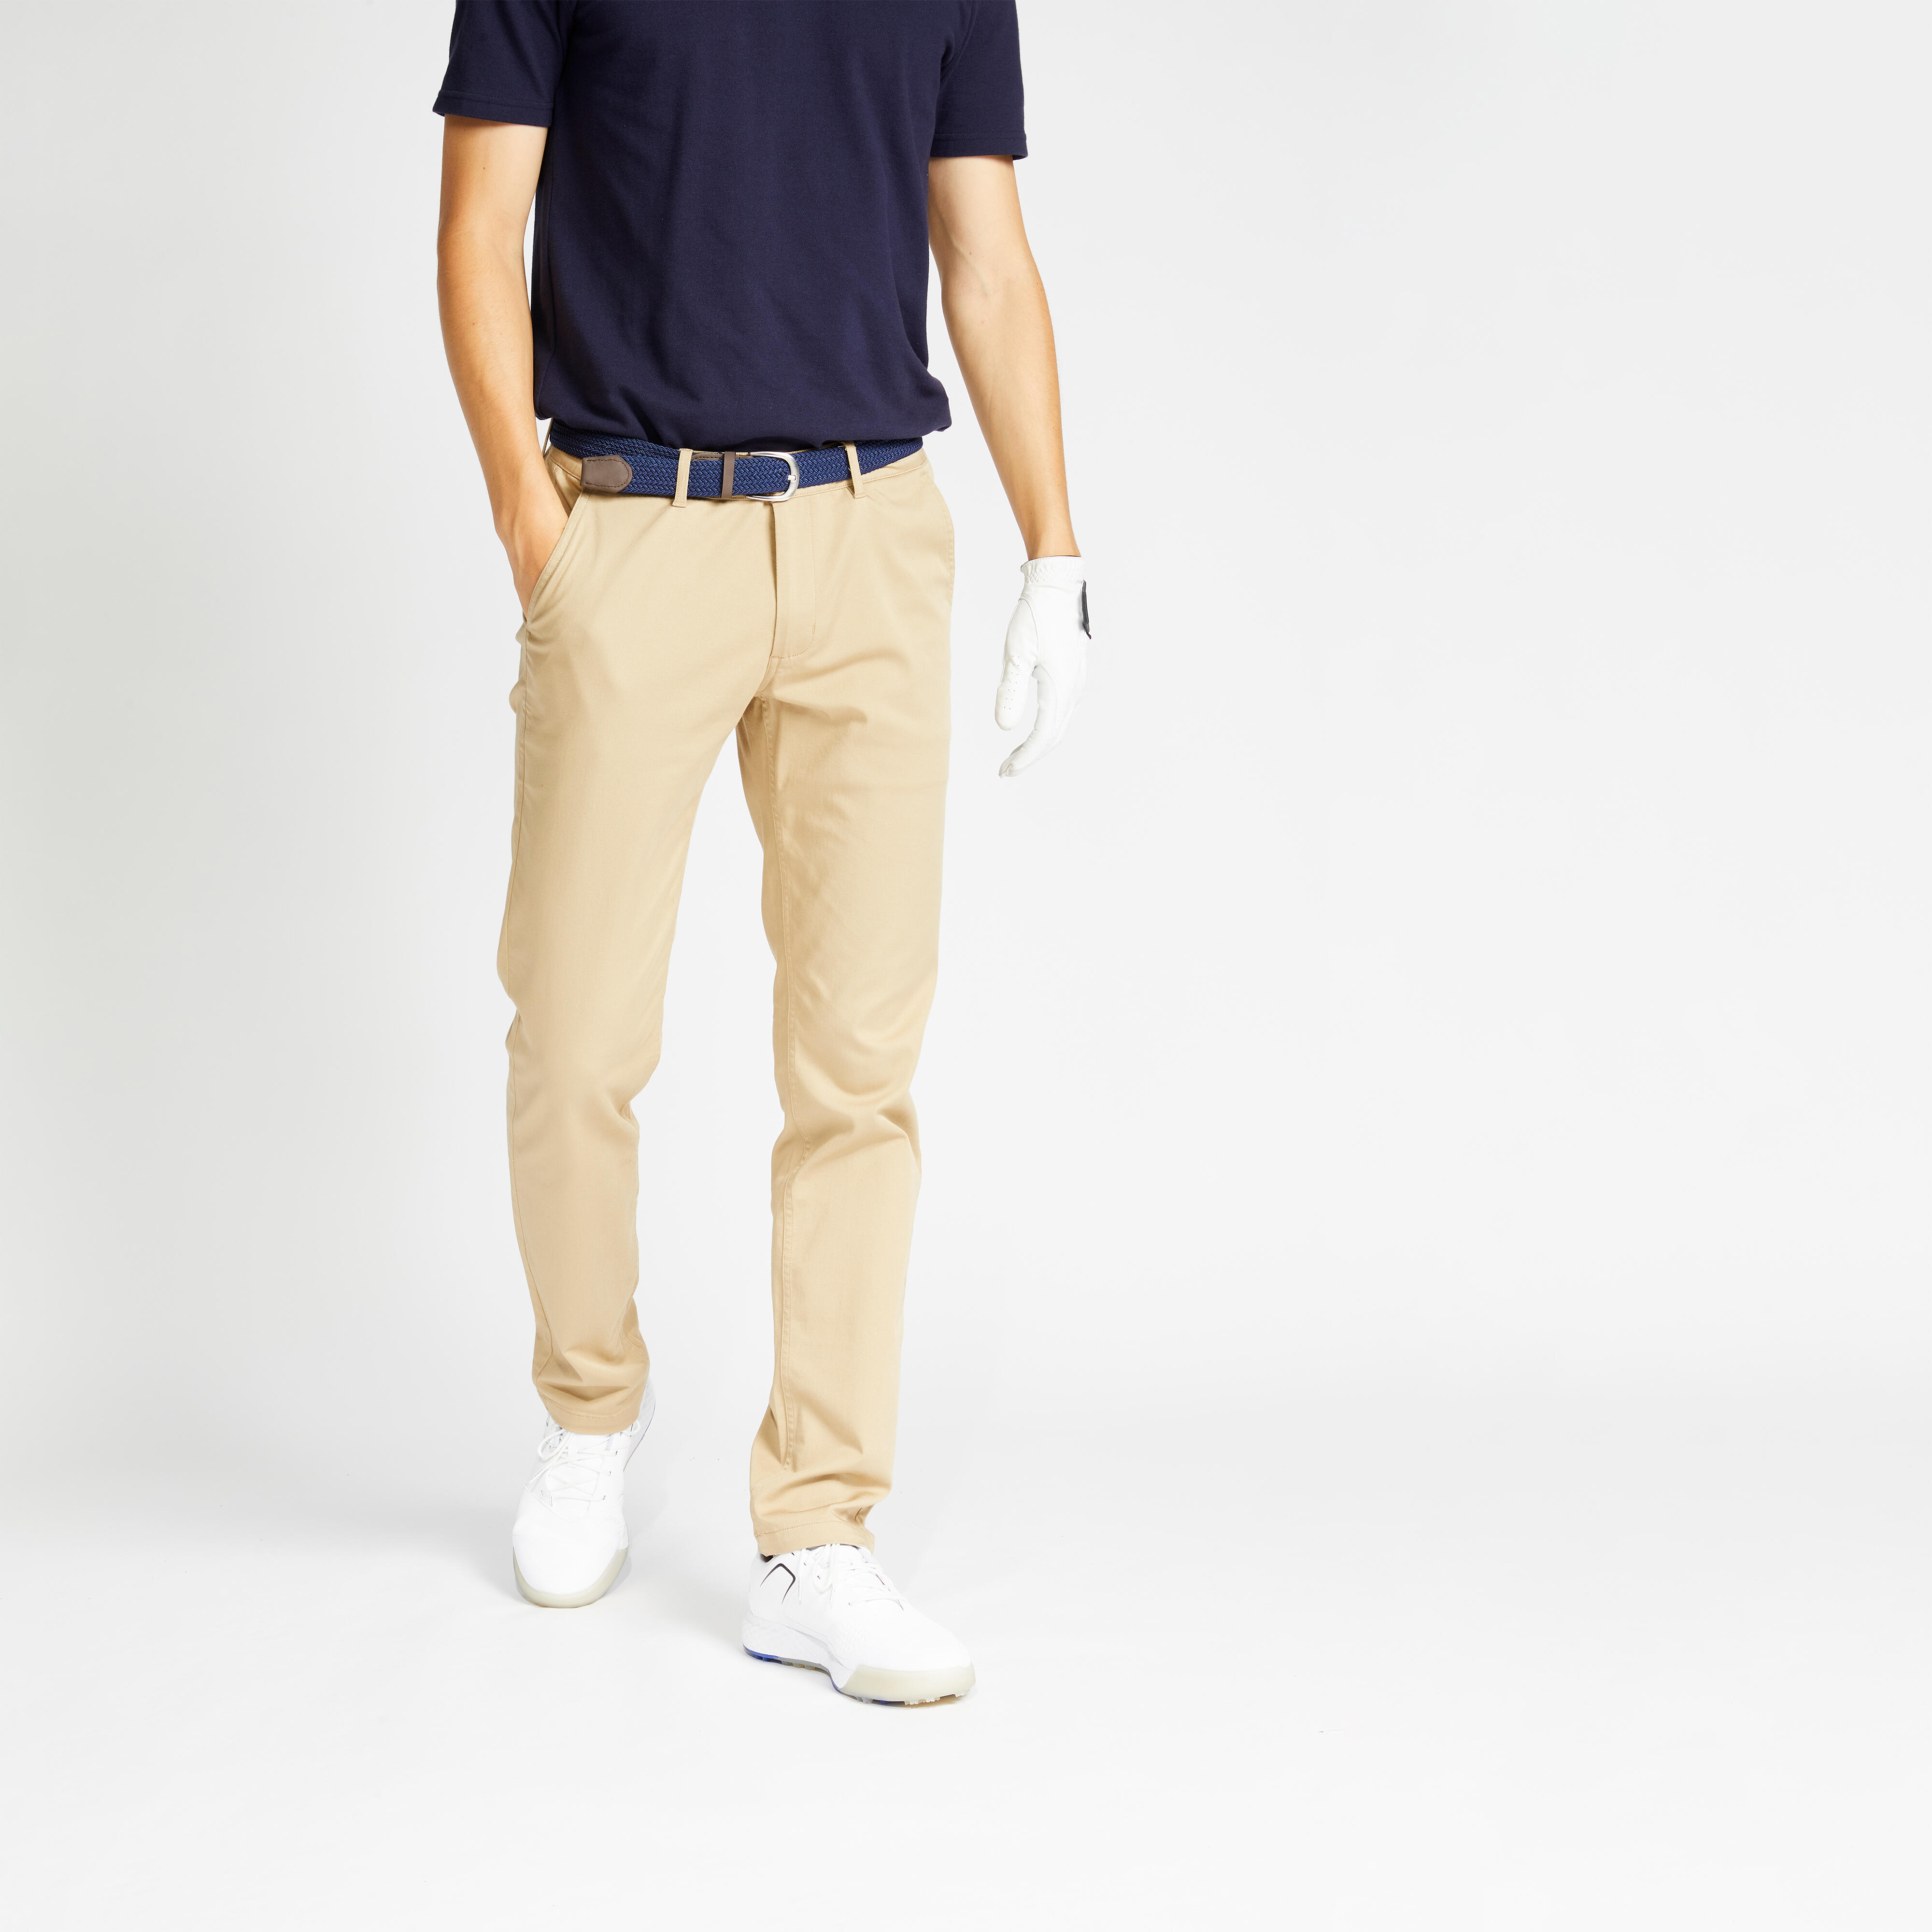 TechPro Textured Casual Khakis In Beige  Nadal Fit Hector